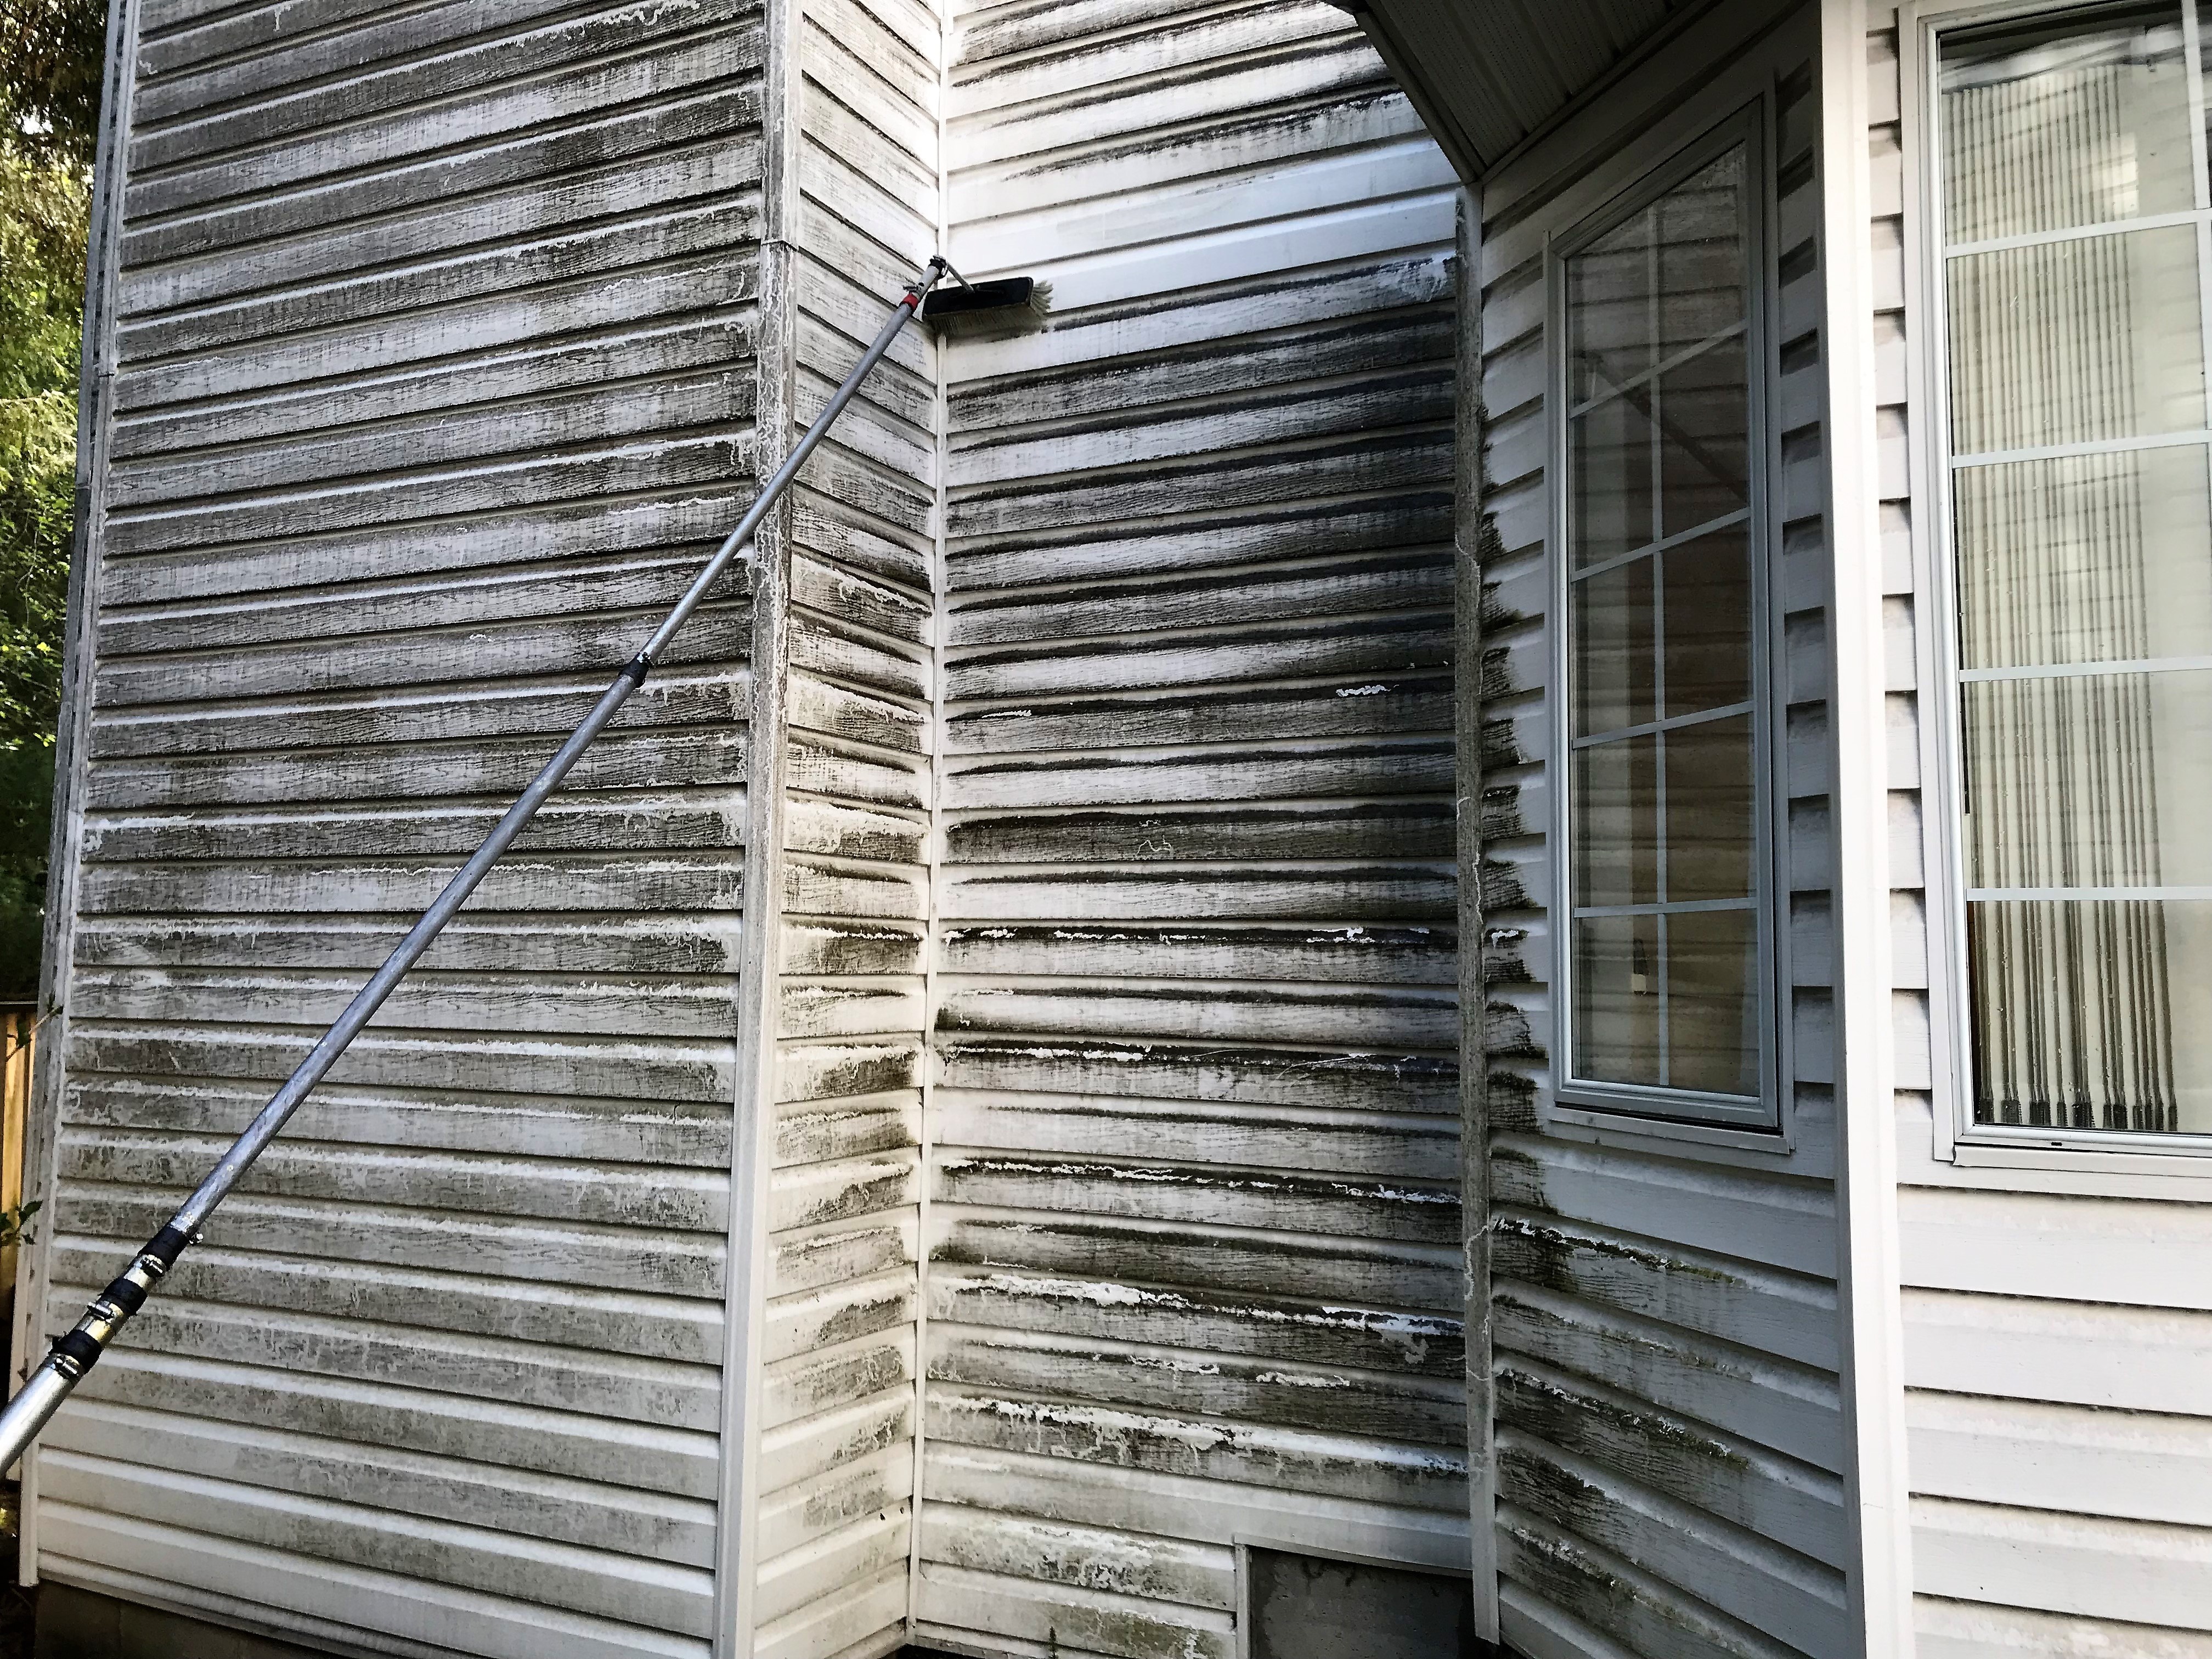 Over 10 years of dirt and mildew on vinyl siding.